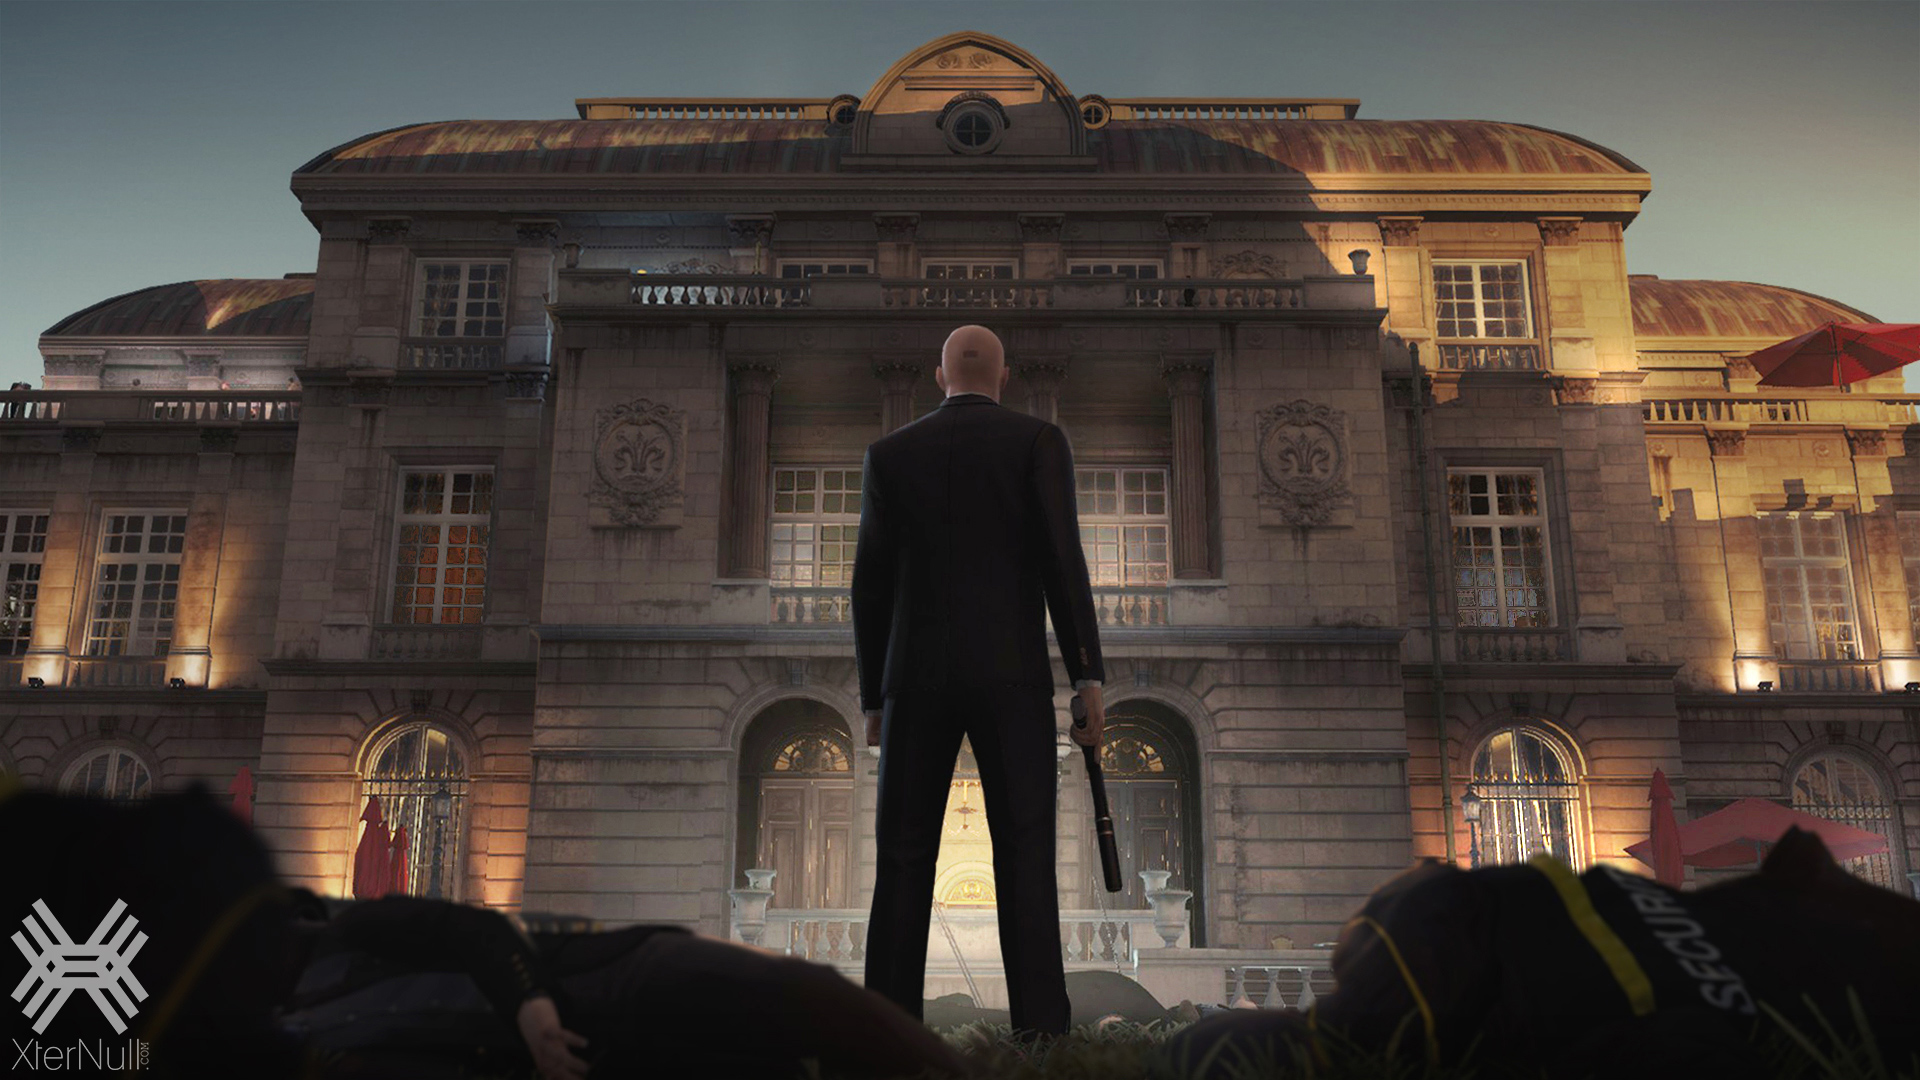 HITMAN 3 (v3.10.0/v3.10.1/Update 2 + H1/H2 Missions + Unlocker, MULTi5)  [FitGirl Repack, Selective Download] from 18.6 GB : r/CrackWatch